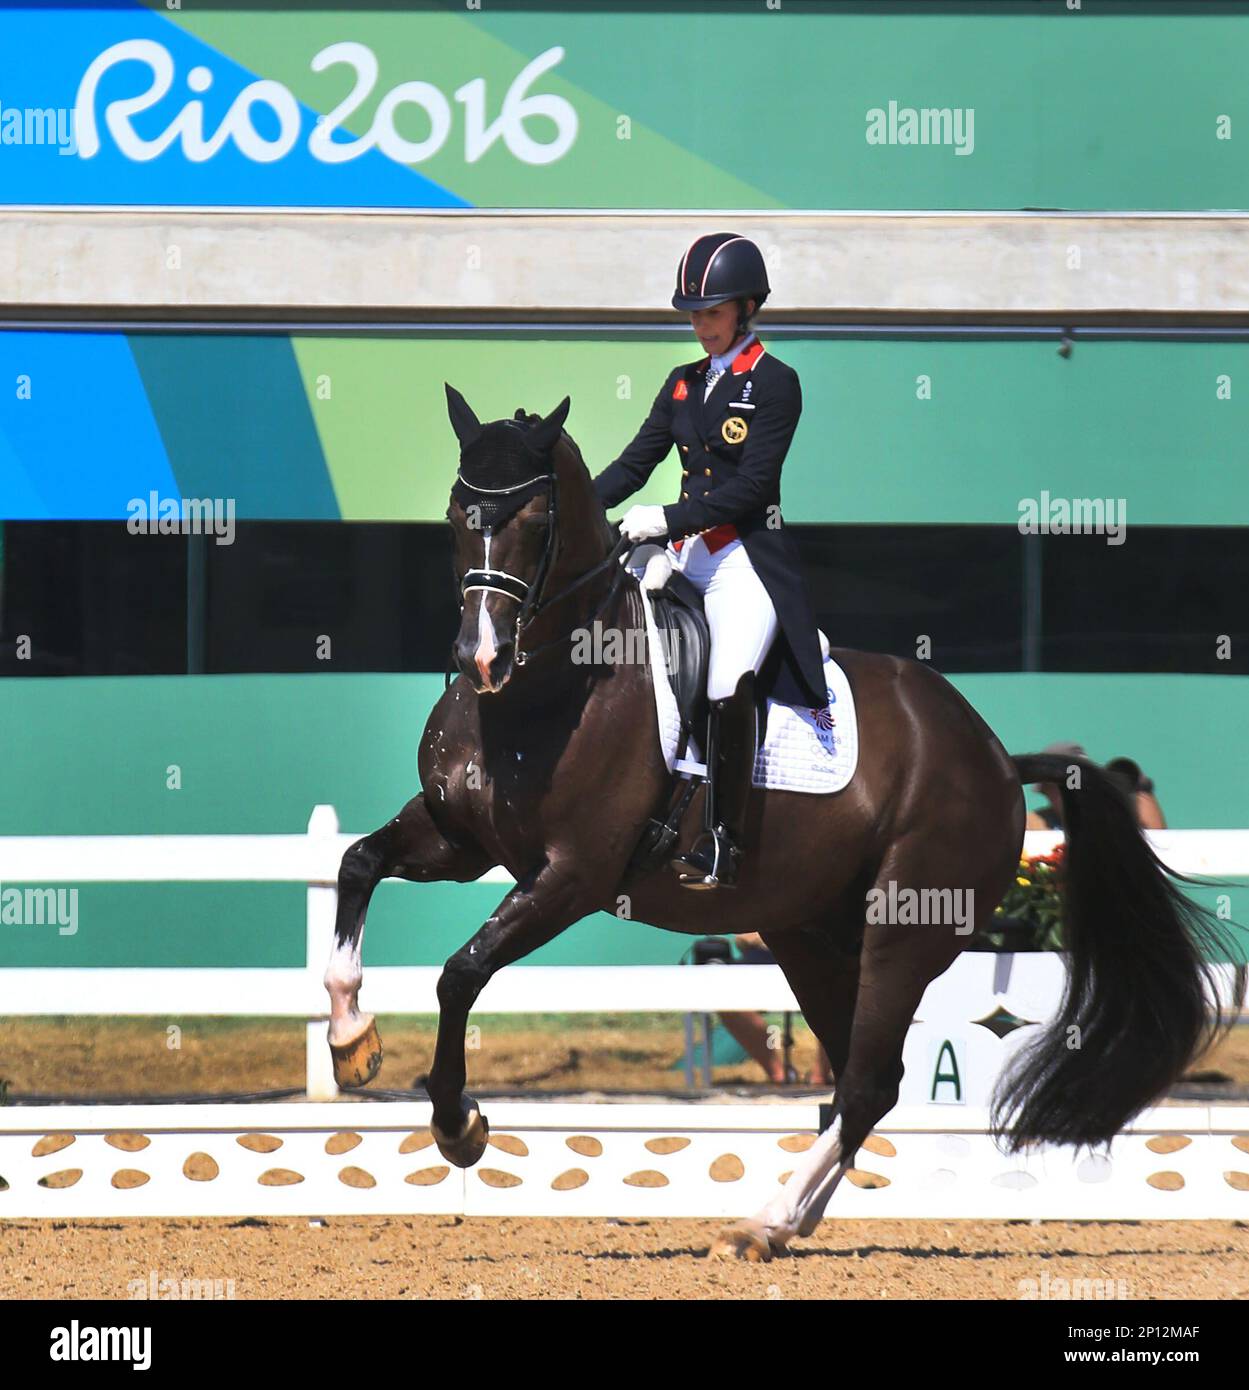 August 15, 2016 - Rio de Janeiro, Brazil - Great Britain's CHARLOTTE  DUJARDIN, a defending world champion in the equestrian dressage event,  executes her routine which which received a 93.928 percent score